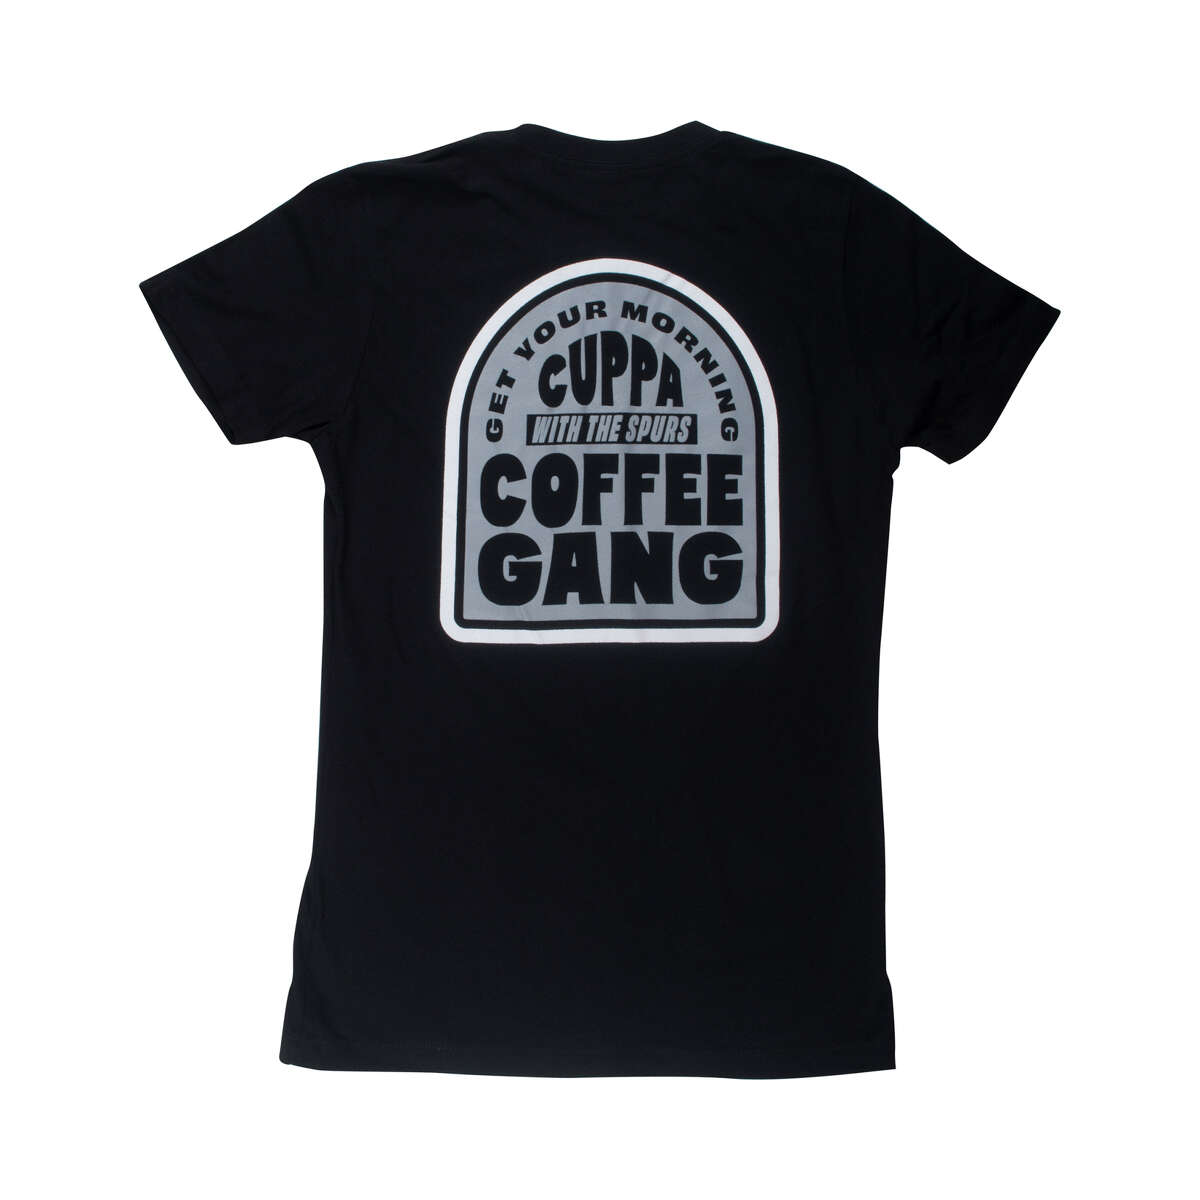 After teasing the new products earlier this week, Spurs confirmed to MySA Friday that a limited edition line of Coffee Gang novelty items including t-shirts, hats, stickers and mugs will be up for grabs starting April 1.